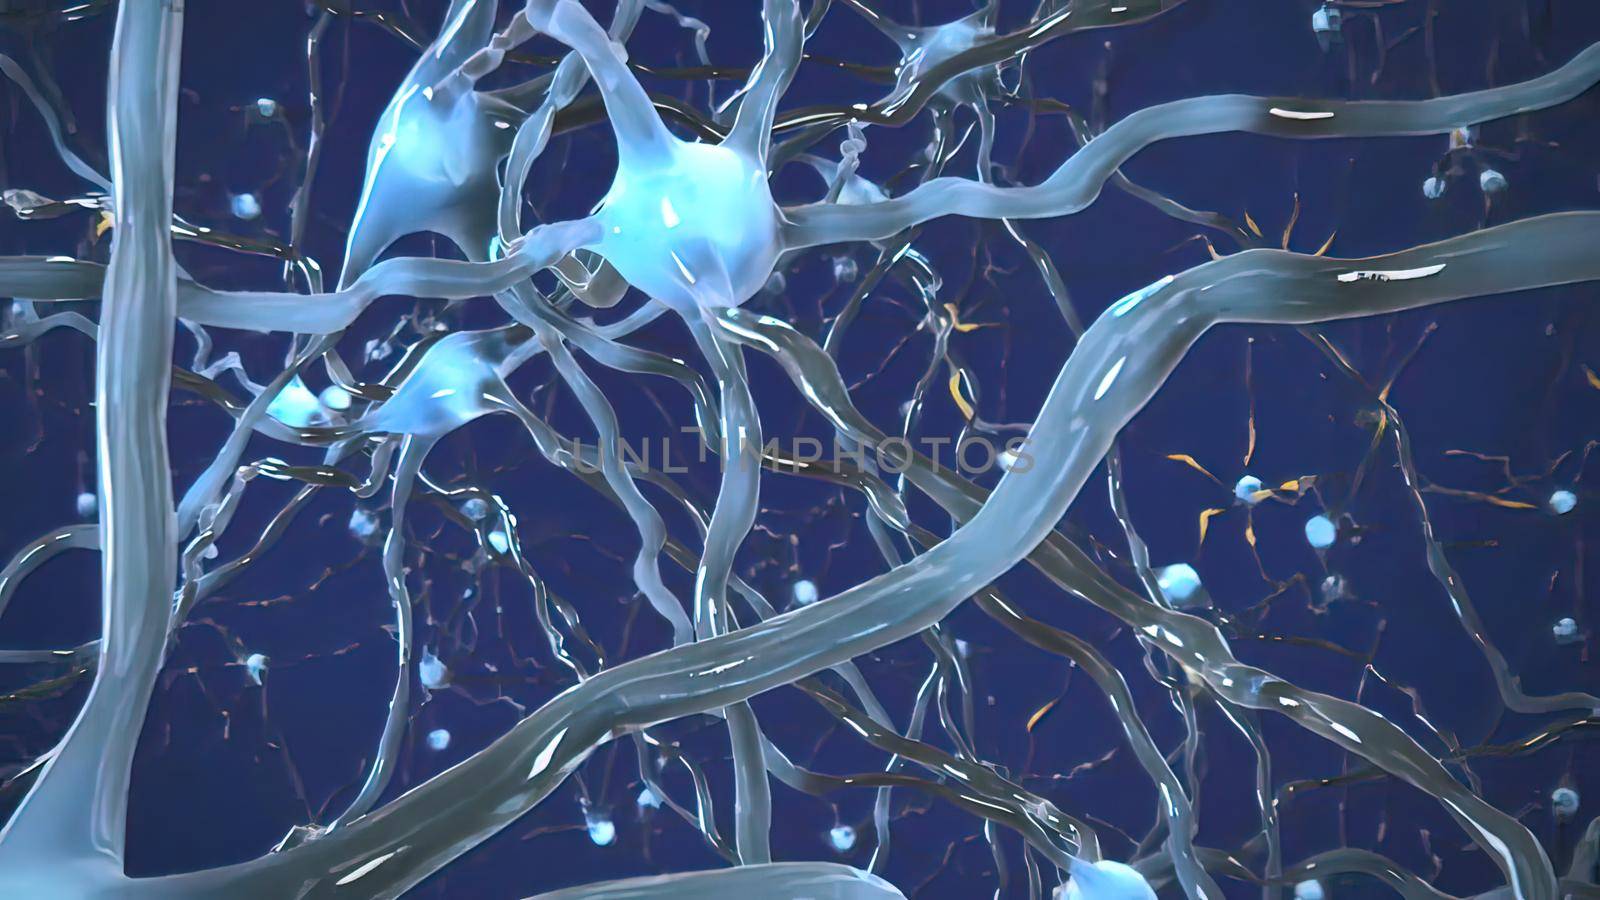 Intro Brain Impulses. Neuron System. Transferring Pulses And Generating .From neurons during synapsis to a human head. 3d illustration